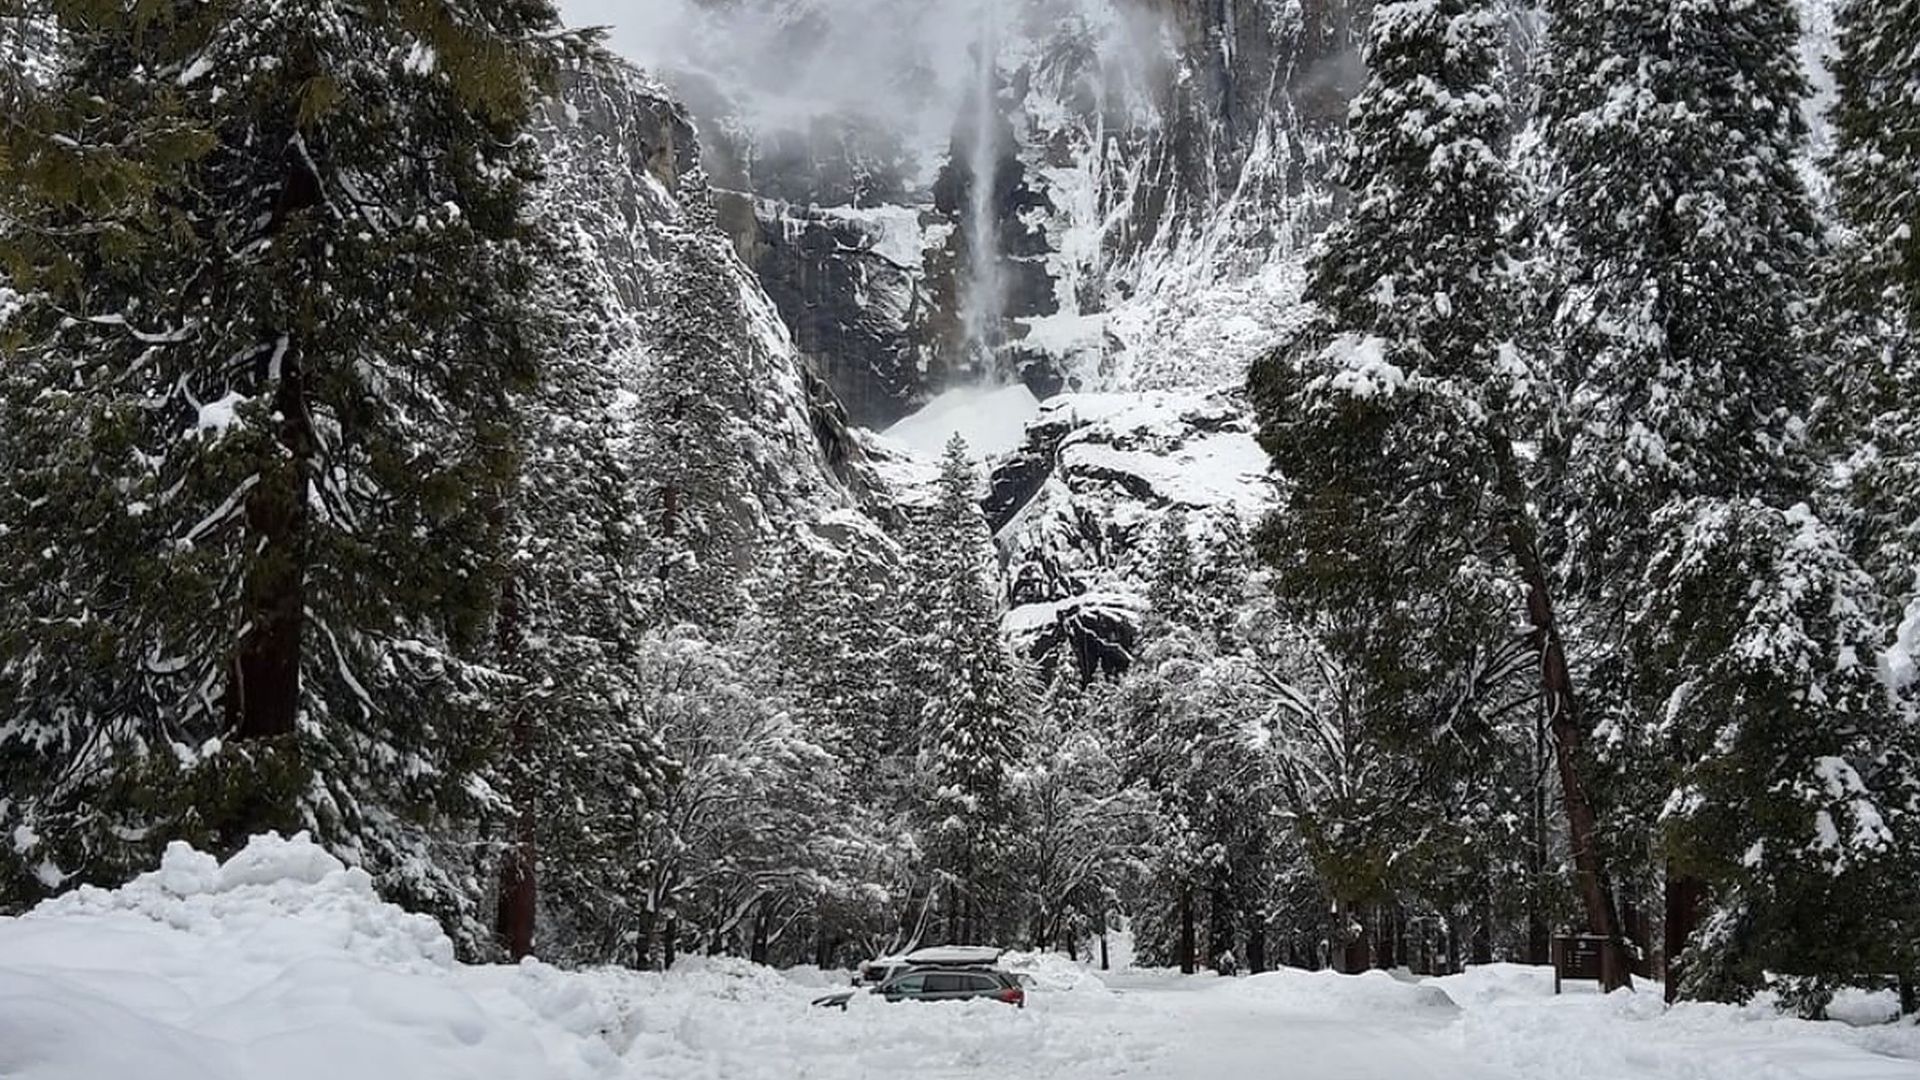 A screenshot of a Yosemite National Park tweet of a car buried in snow.